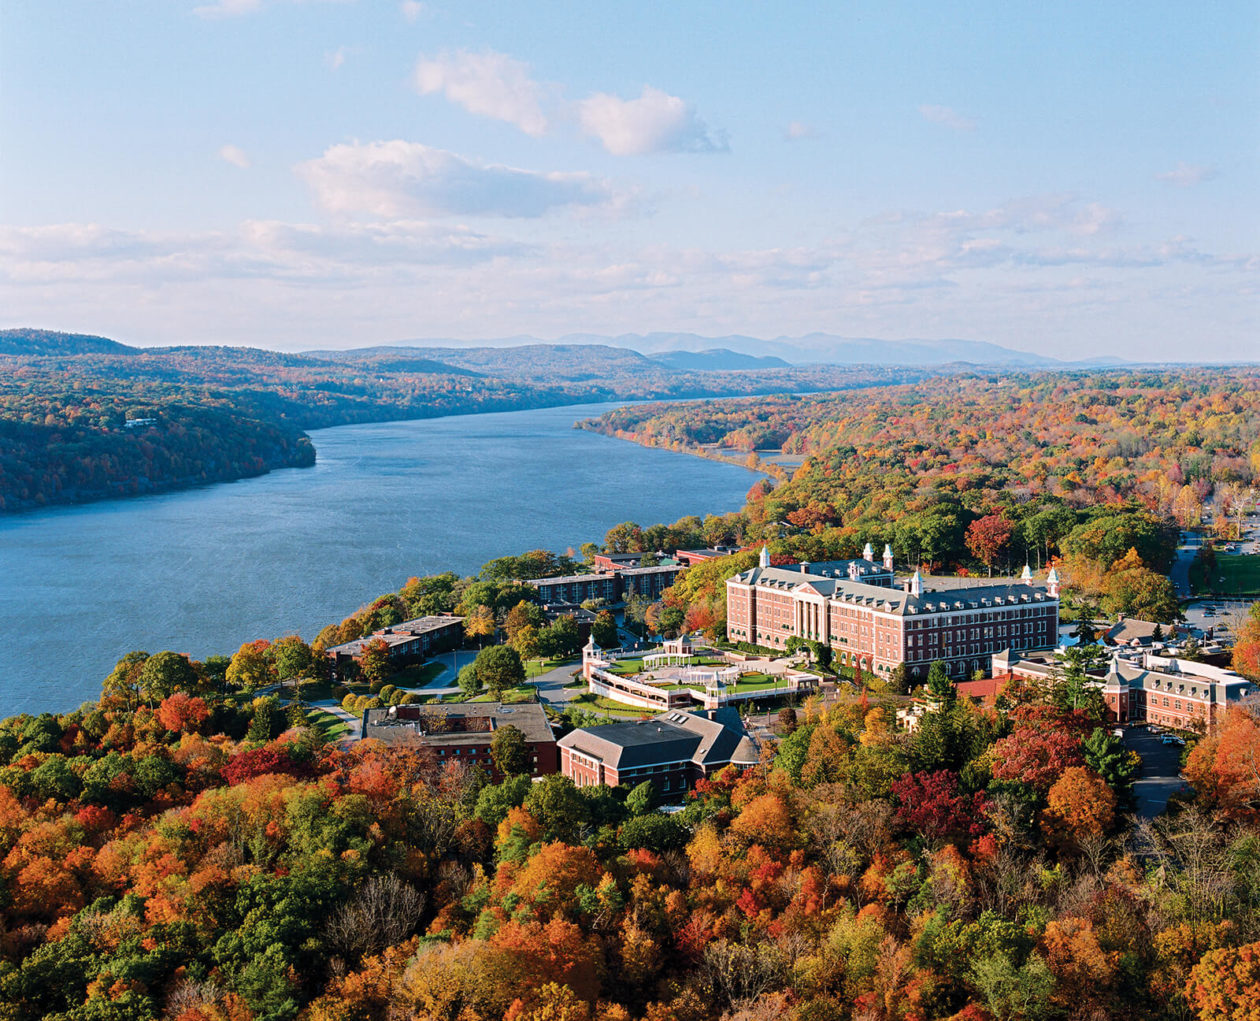 Aerial view of college campus with fall foliage.